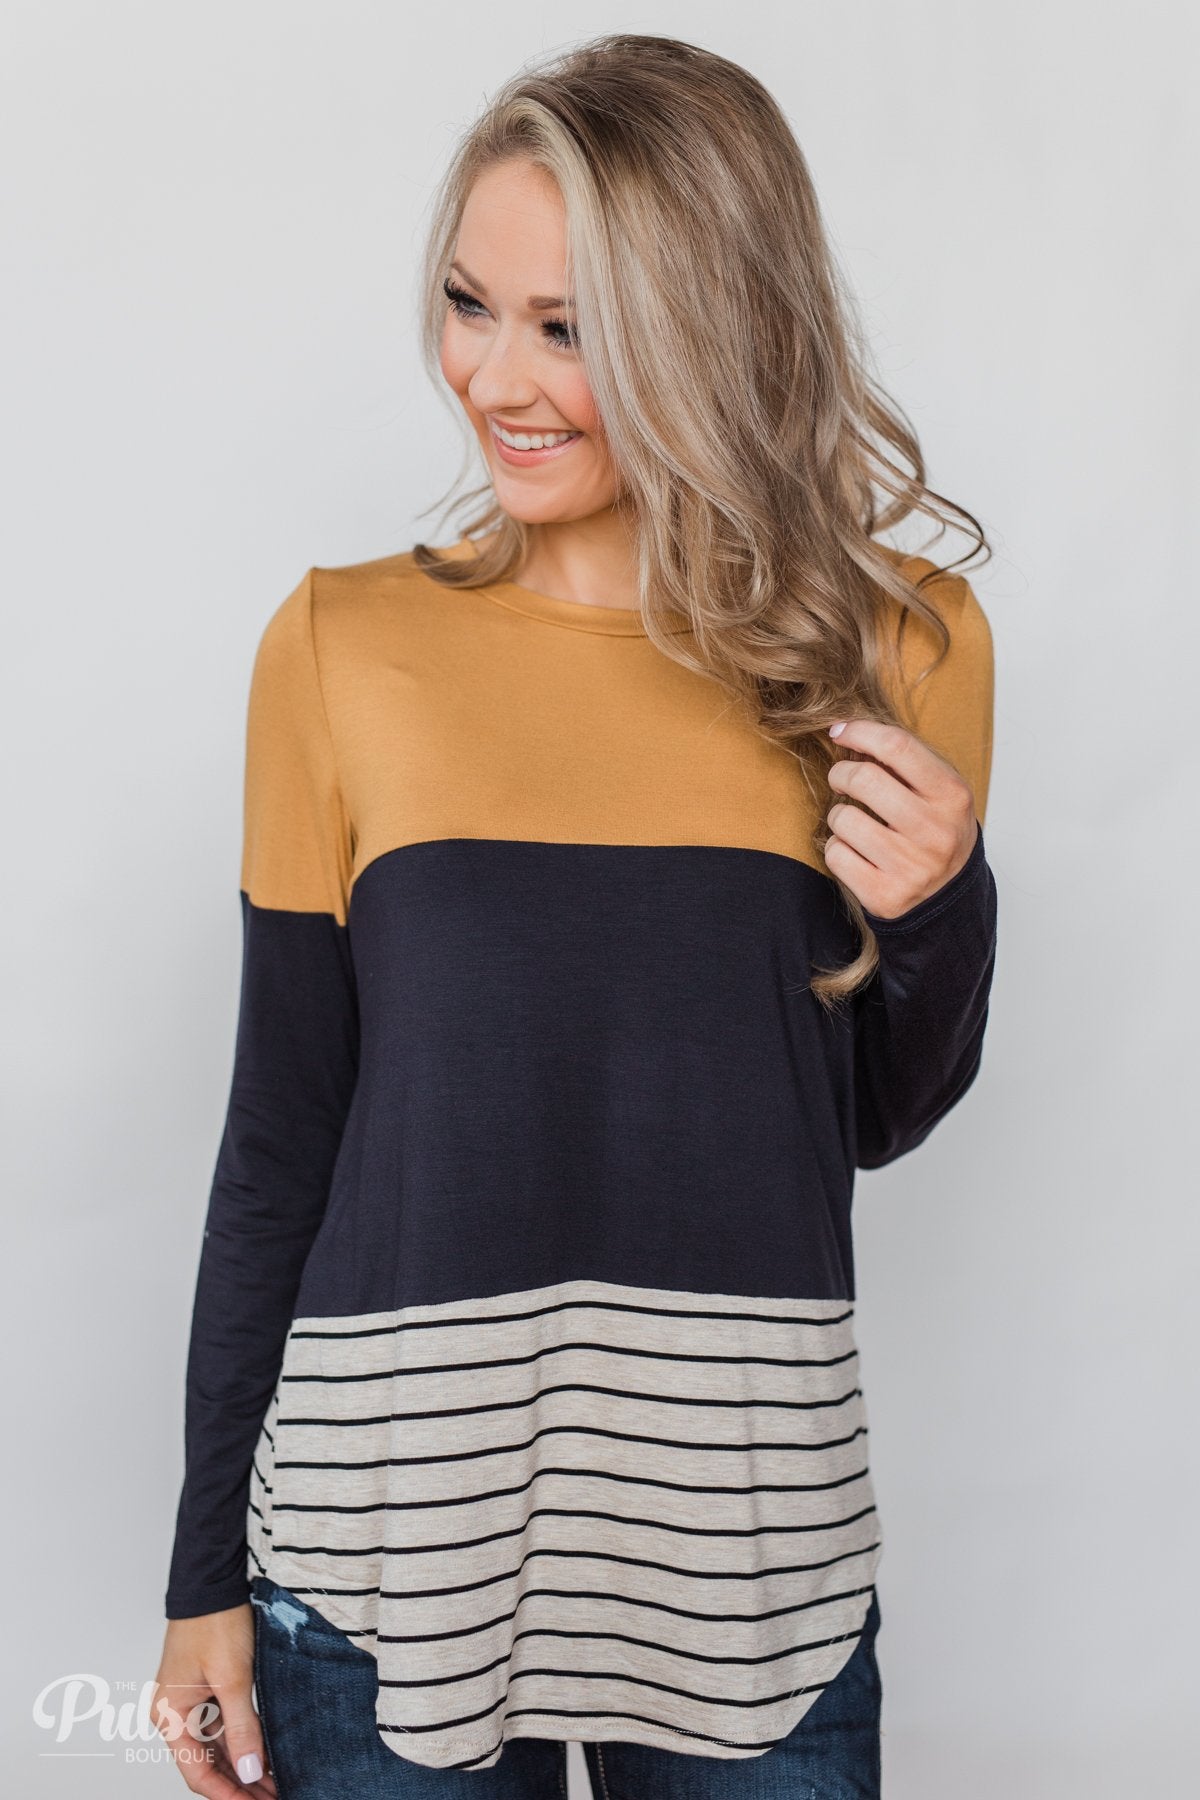 Party in the Back Lace Detail Top- Mustard & Navy